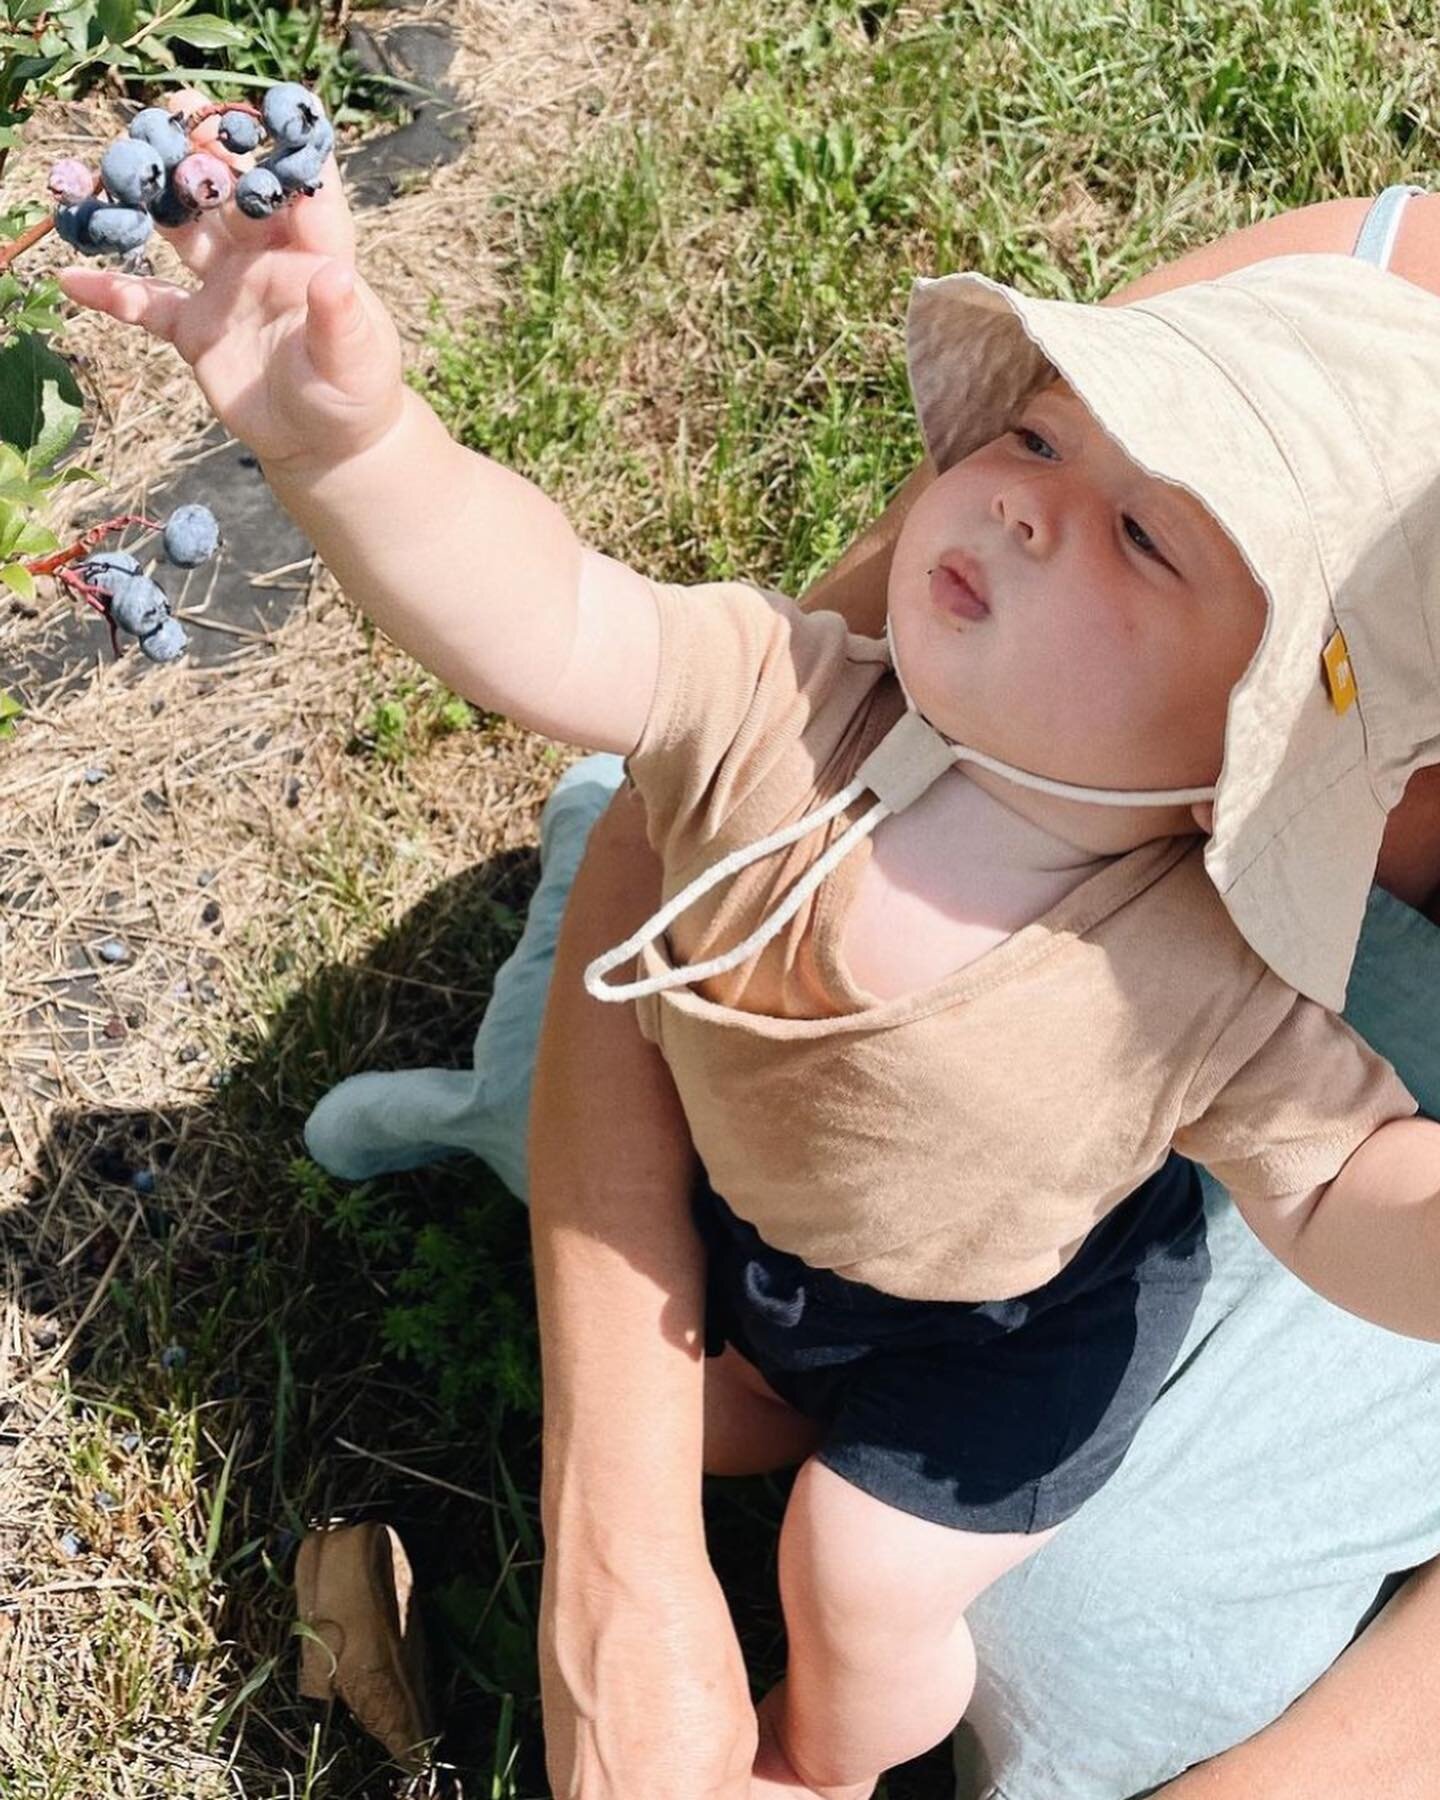 Grabbing the last blueberries for 2022. This will be the LAST weekend for Upick. Open 8AM-6PM. $3/lbs cash only. Image credit and cutest baby Arno thanks to @theartemuse.